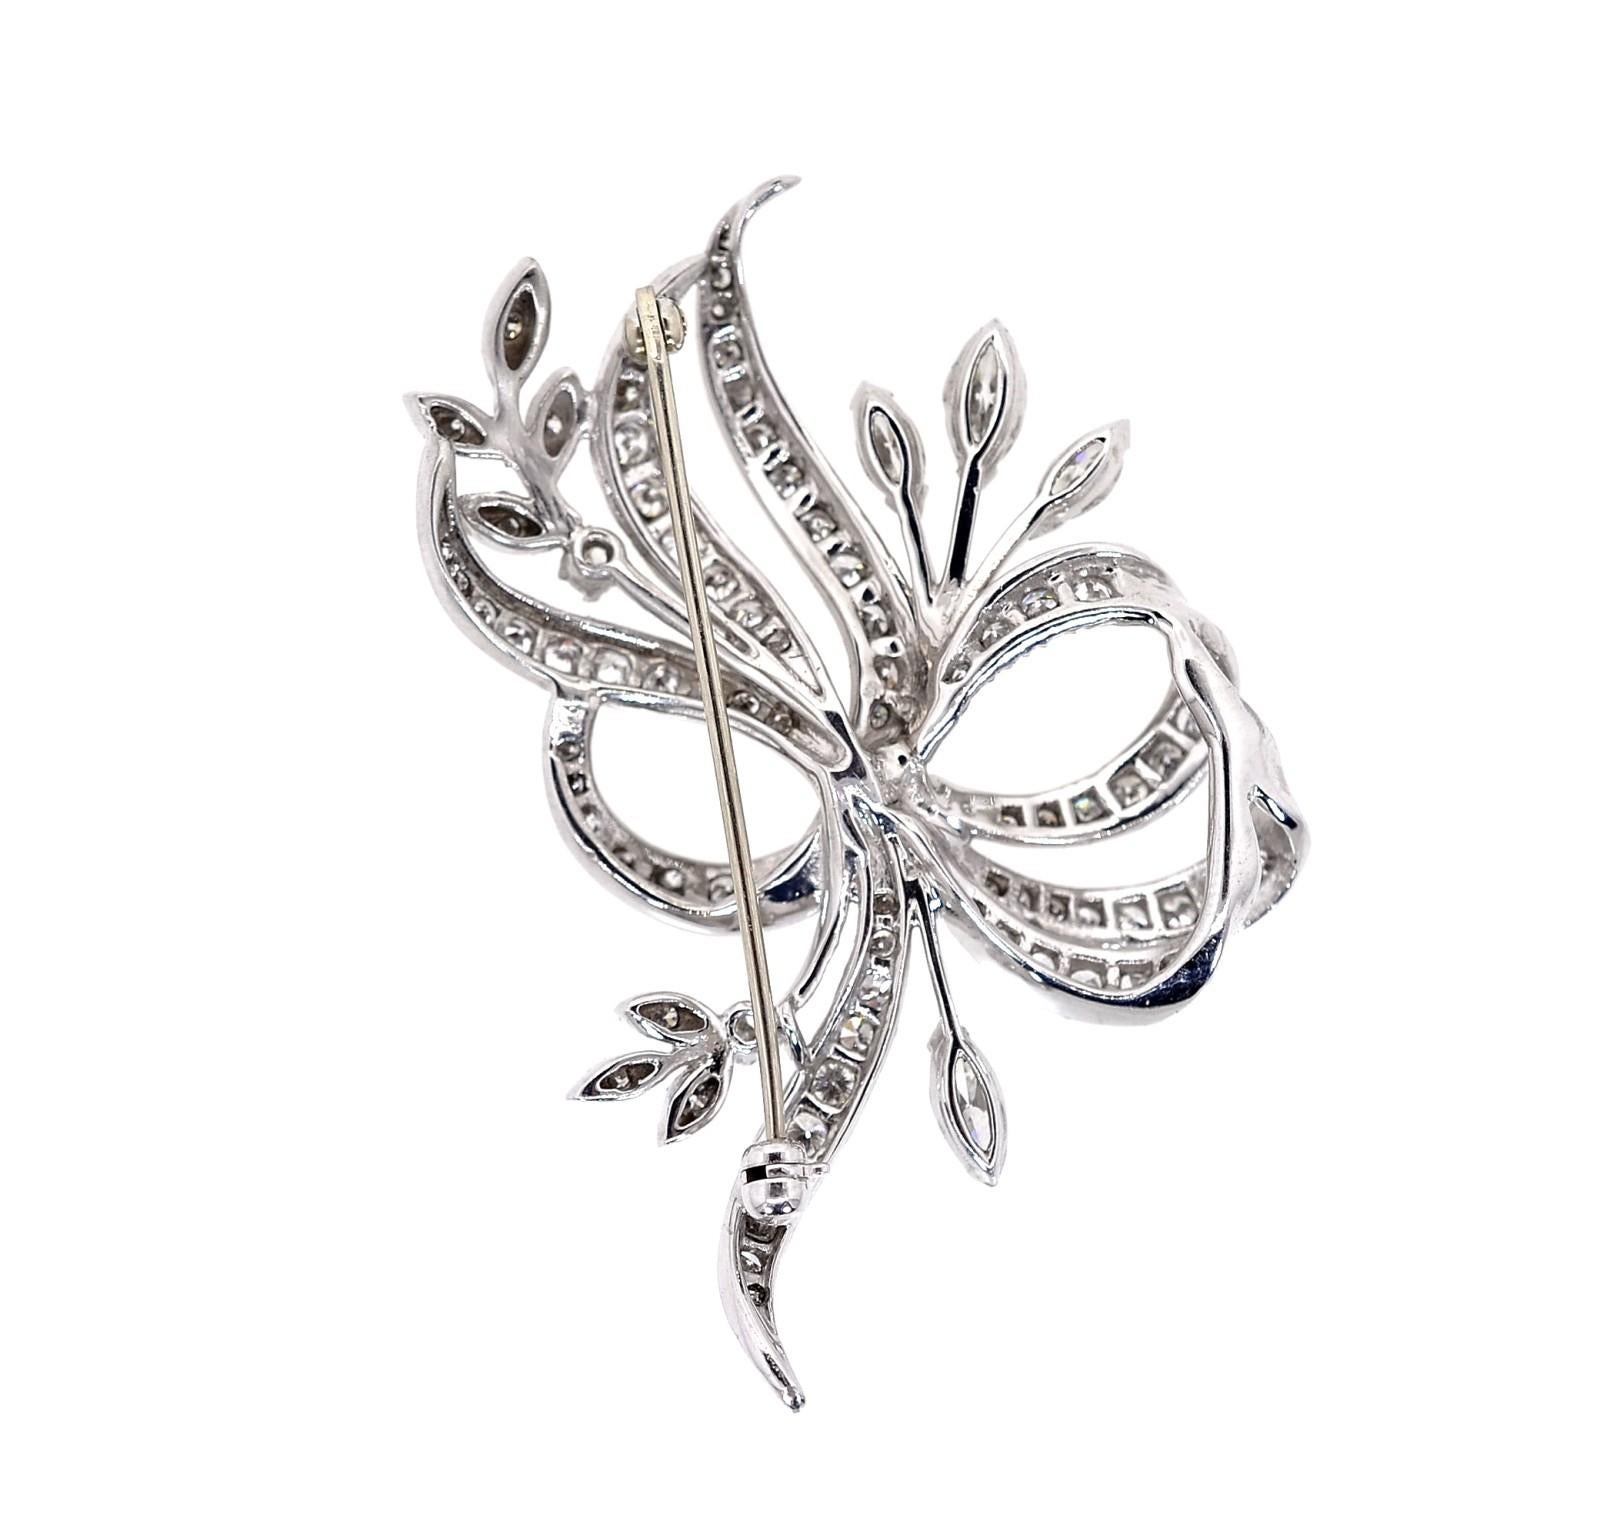 Created in the 1960s, this pretty platinum brooch is of a flowing ribbon design.  It glitters with approx. 2.70 carat of Round and Marquise cut Diamonds of H/I color - VS clarity.  The brooch It is sure to brighten up any outfit at any time.